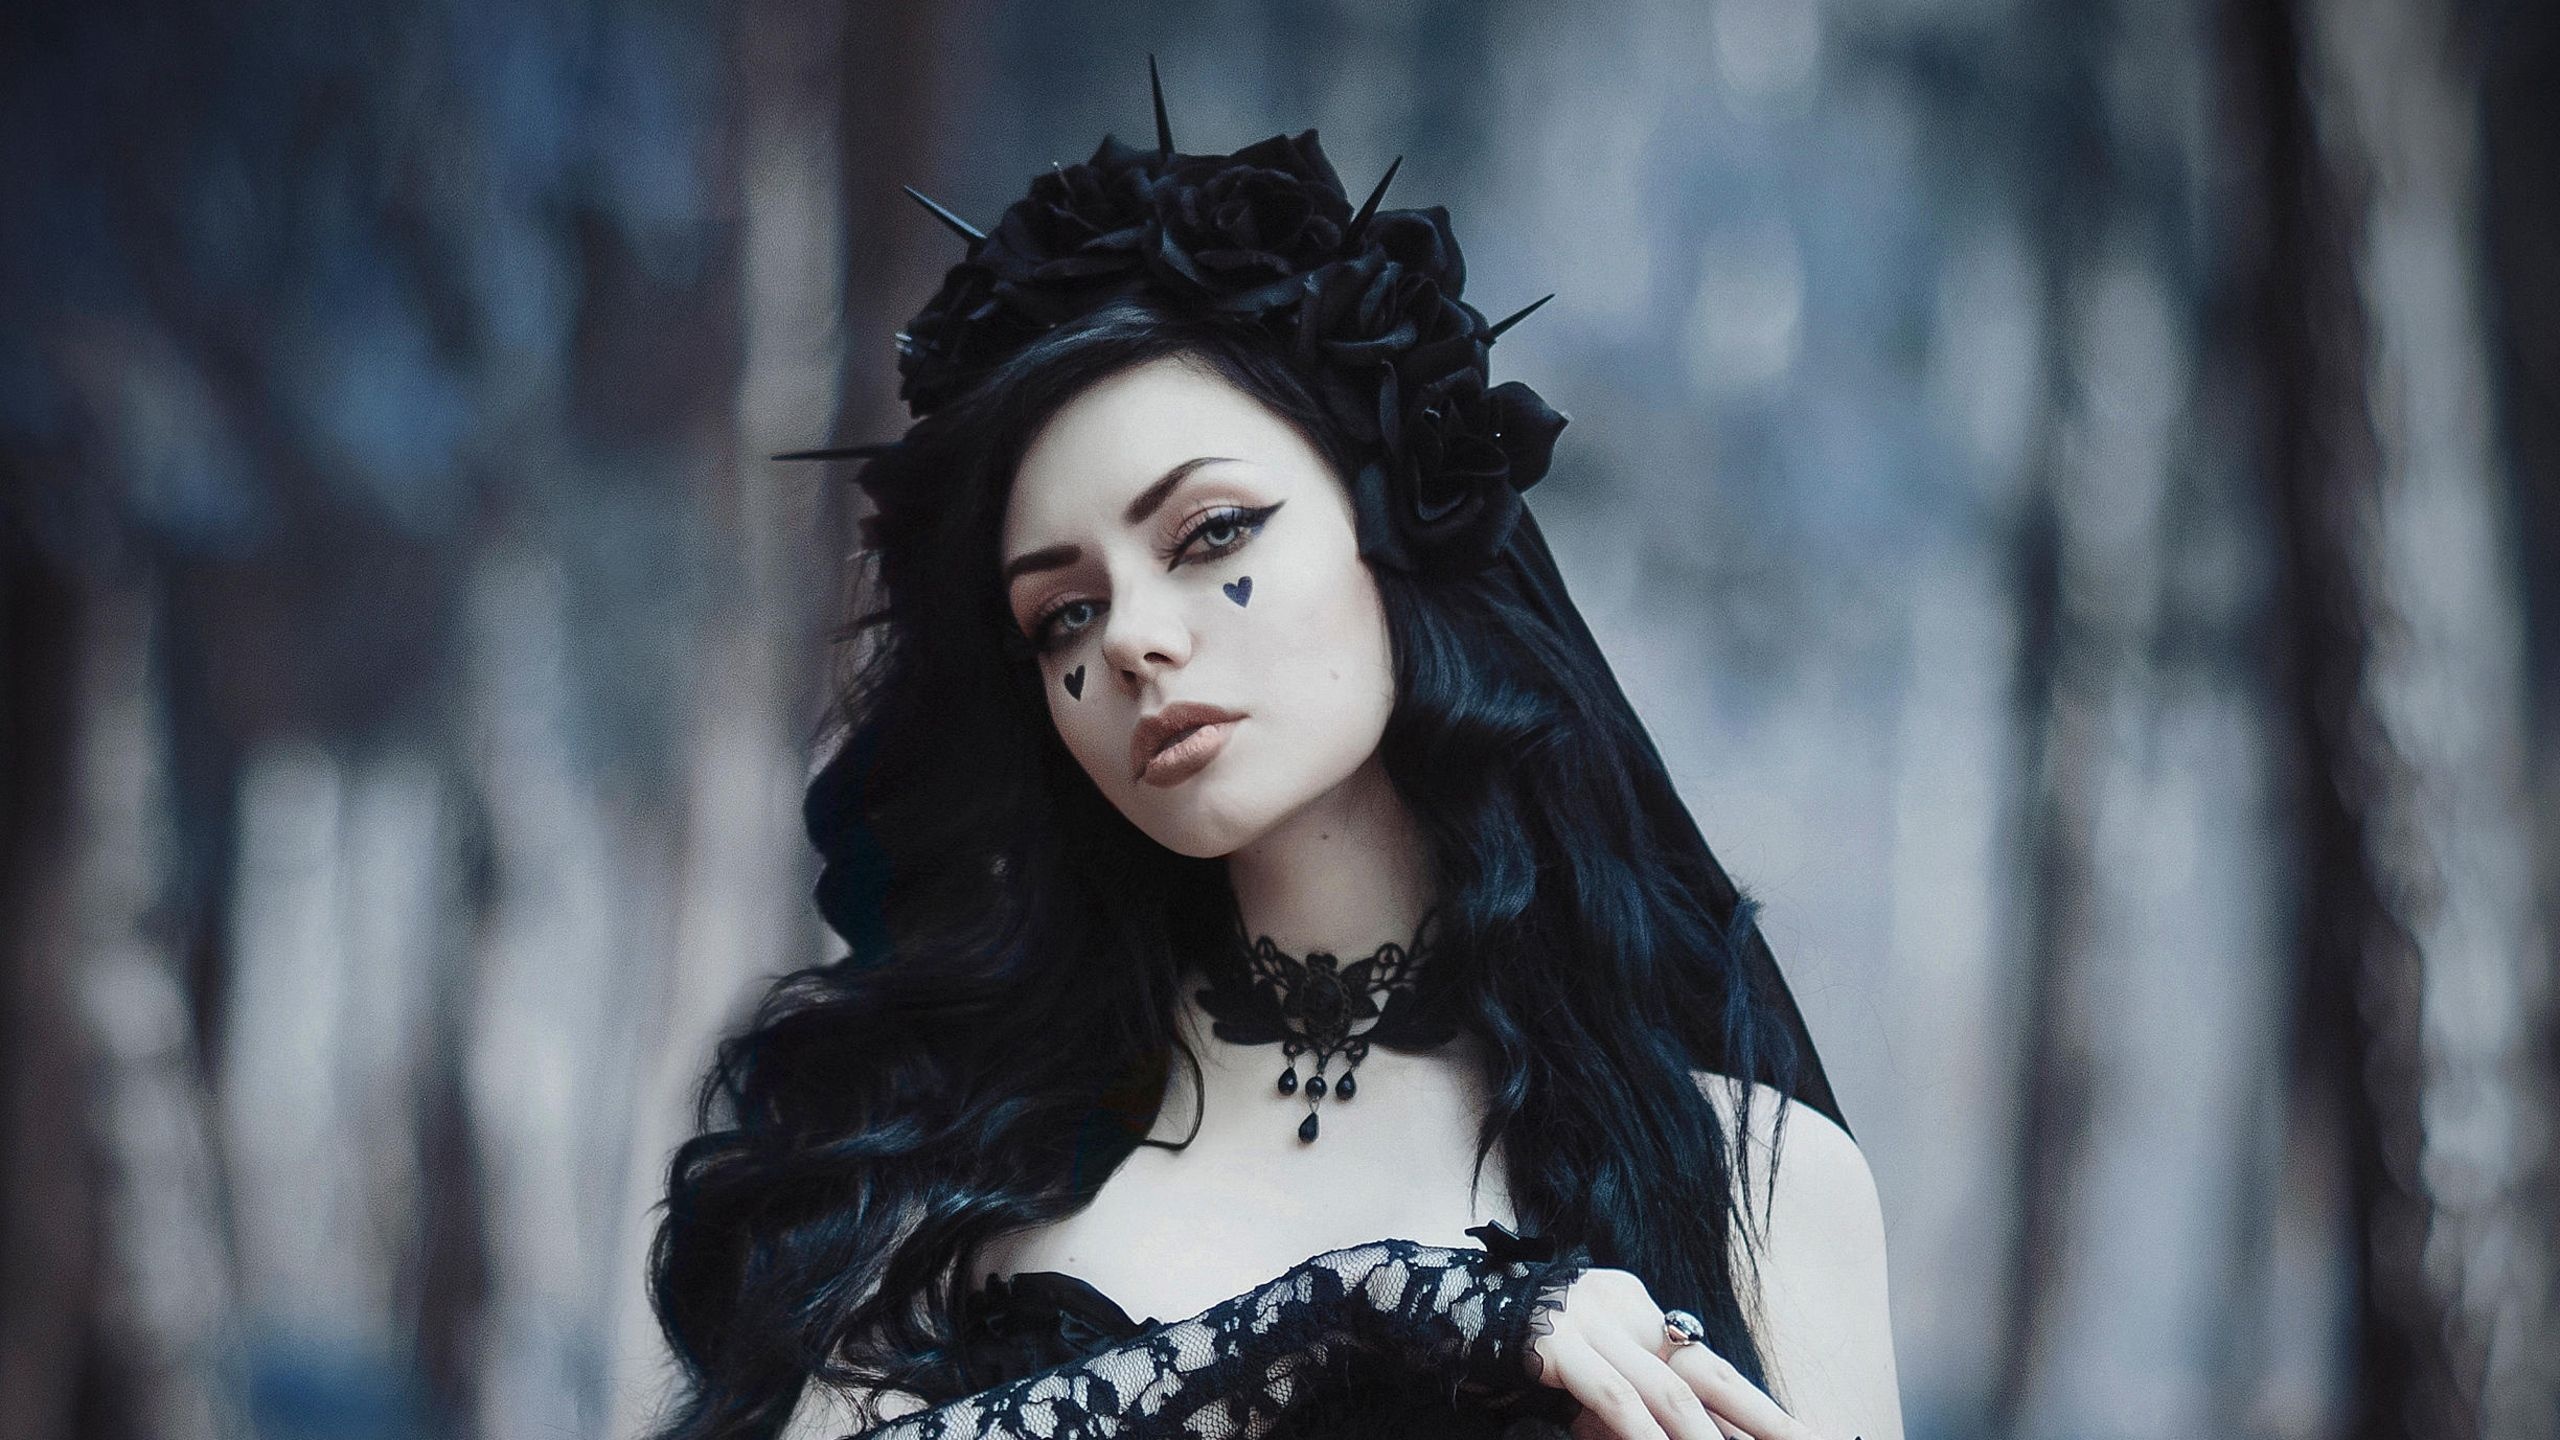 Goth: Gothic bride, Dark beauty, A “porcelain doll” look, A punk-based subculture. 2560x1440 HD Wallpaper.